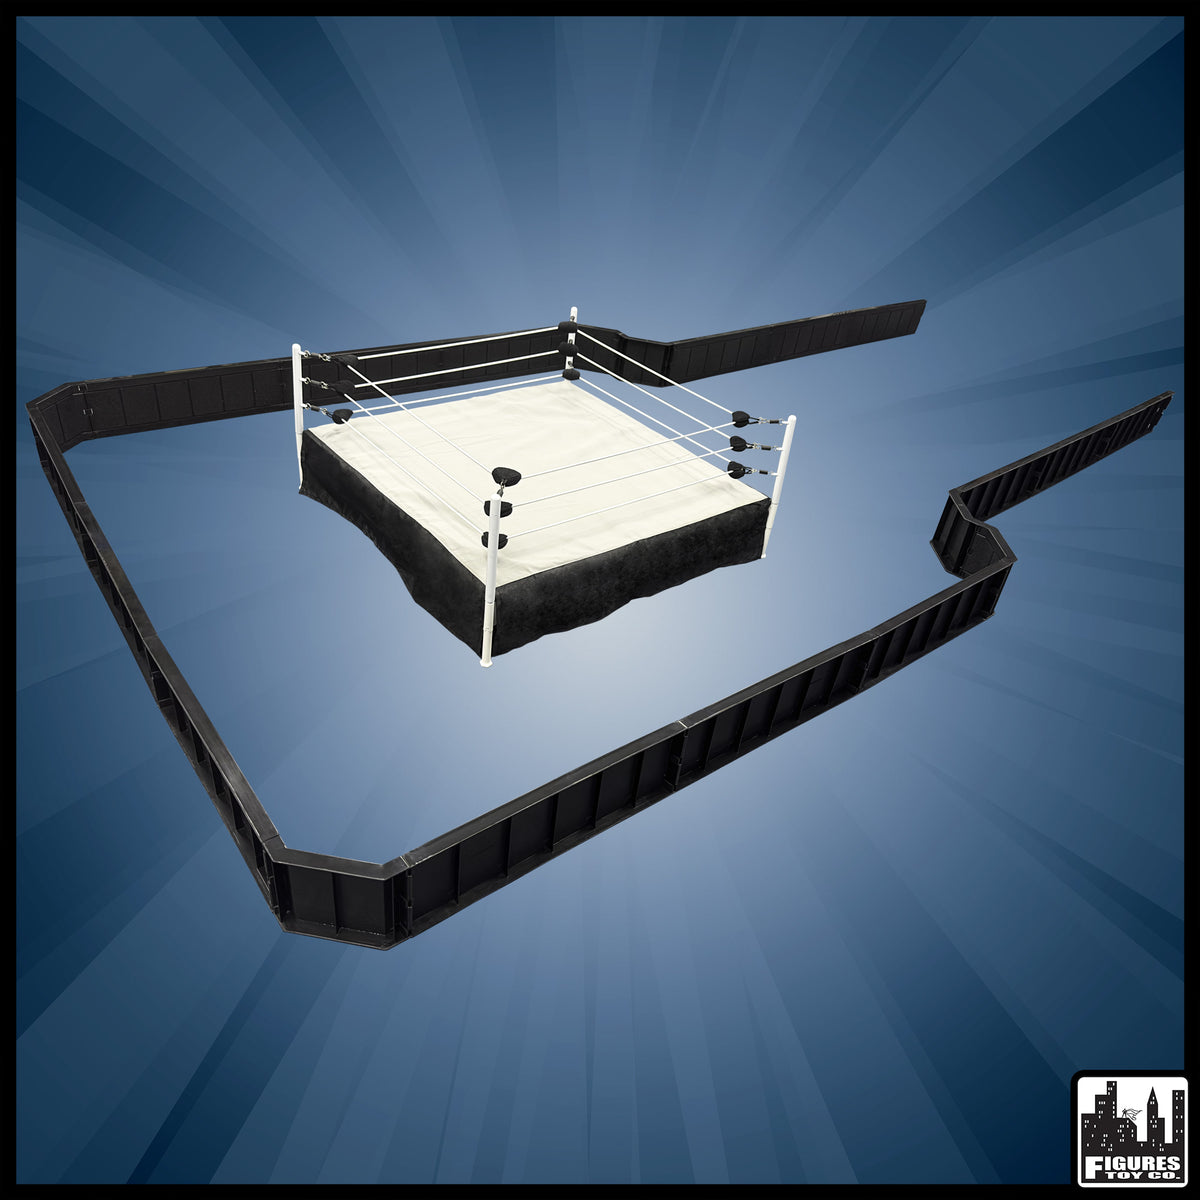 Wrestling Ring &amp; Ultimate Barricade for WWE &amp; AEW Wrestling Action Figures